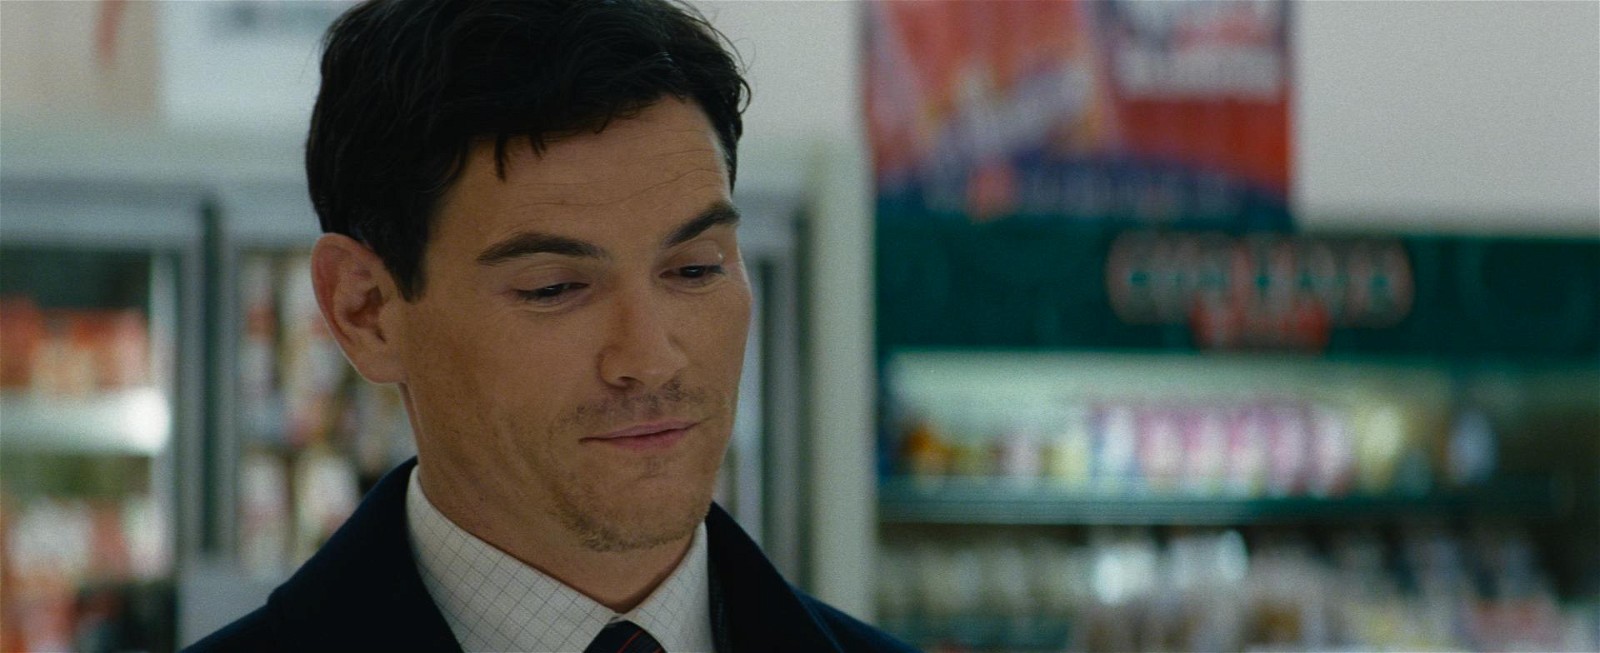 Billy Crudup in Mission Impossible III